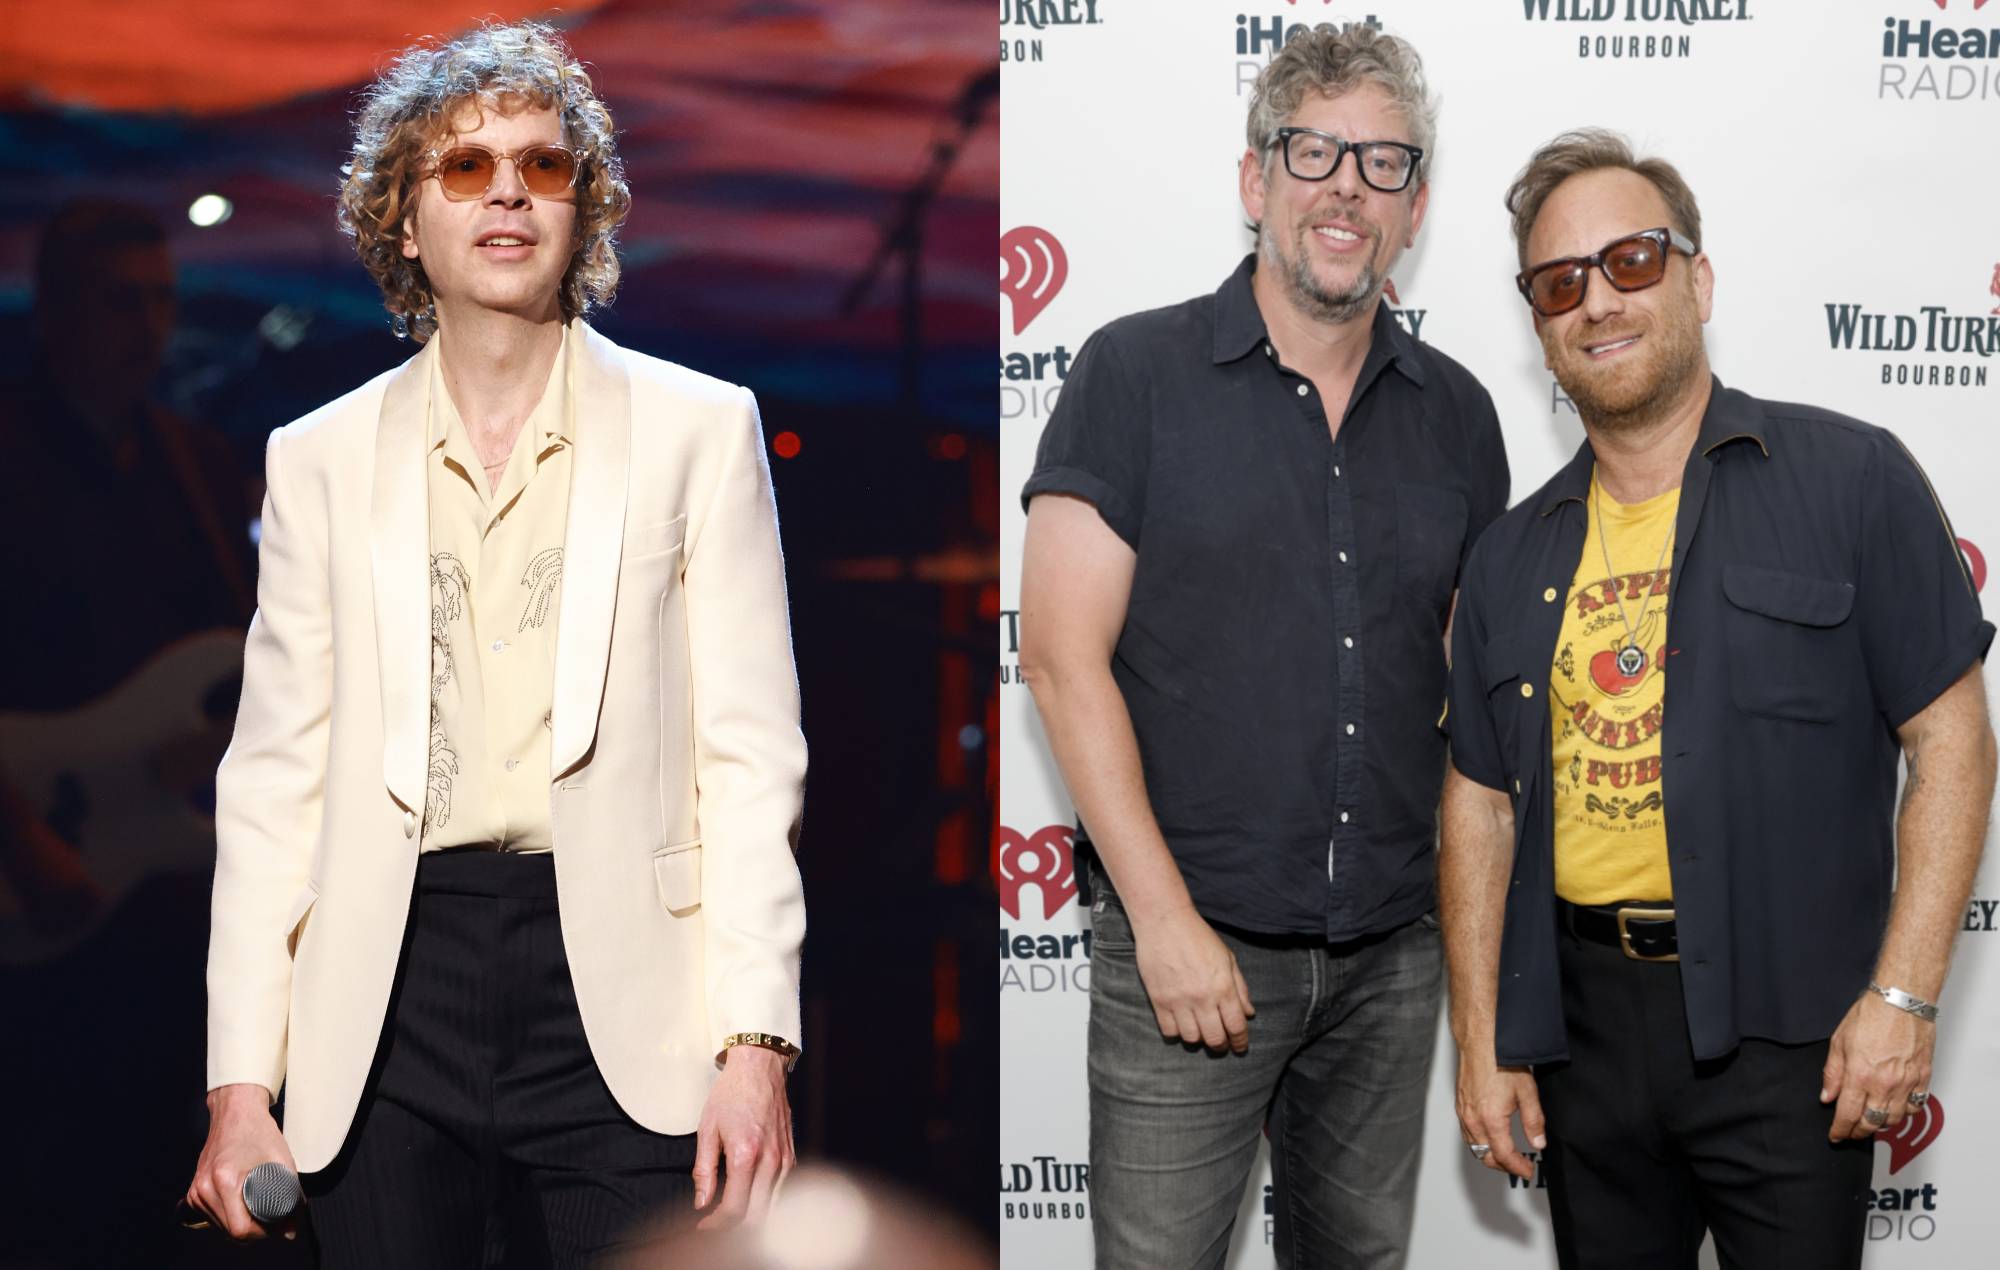 Watch Beck join The Black Keys for a live performance of ‘Loser’